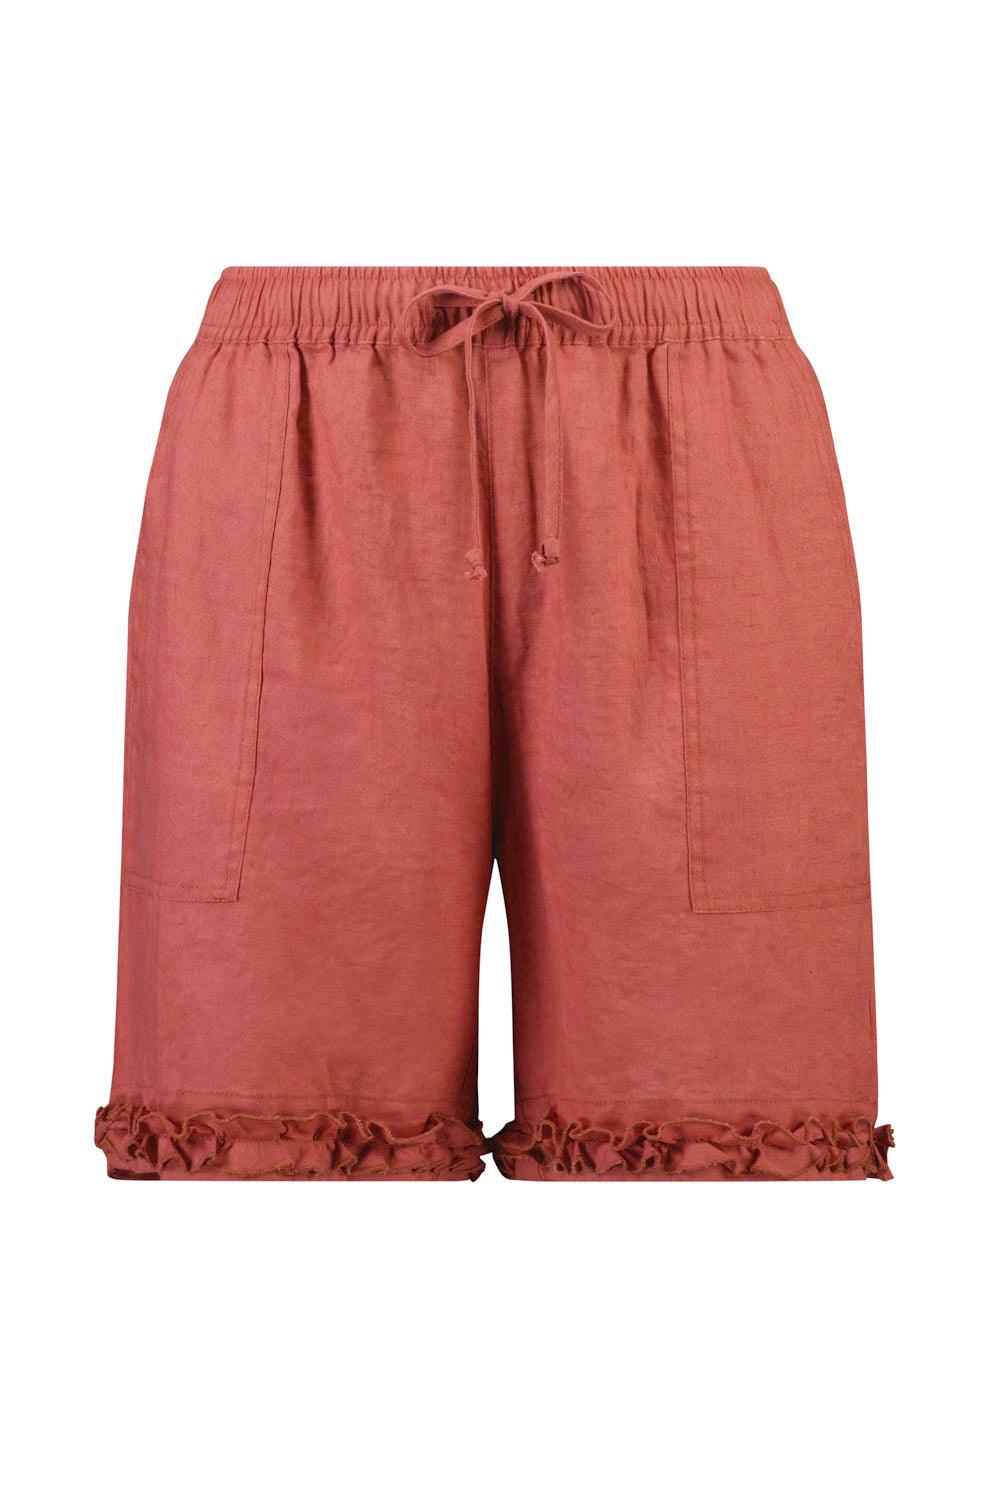 Ruffle Short - Washed Red - VERGE